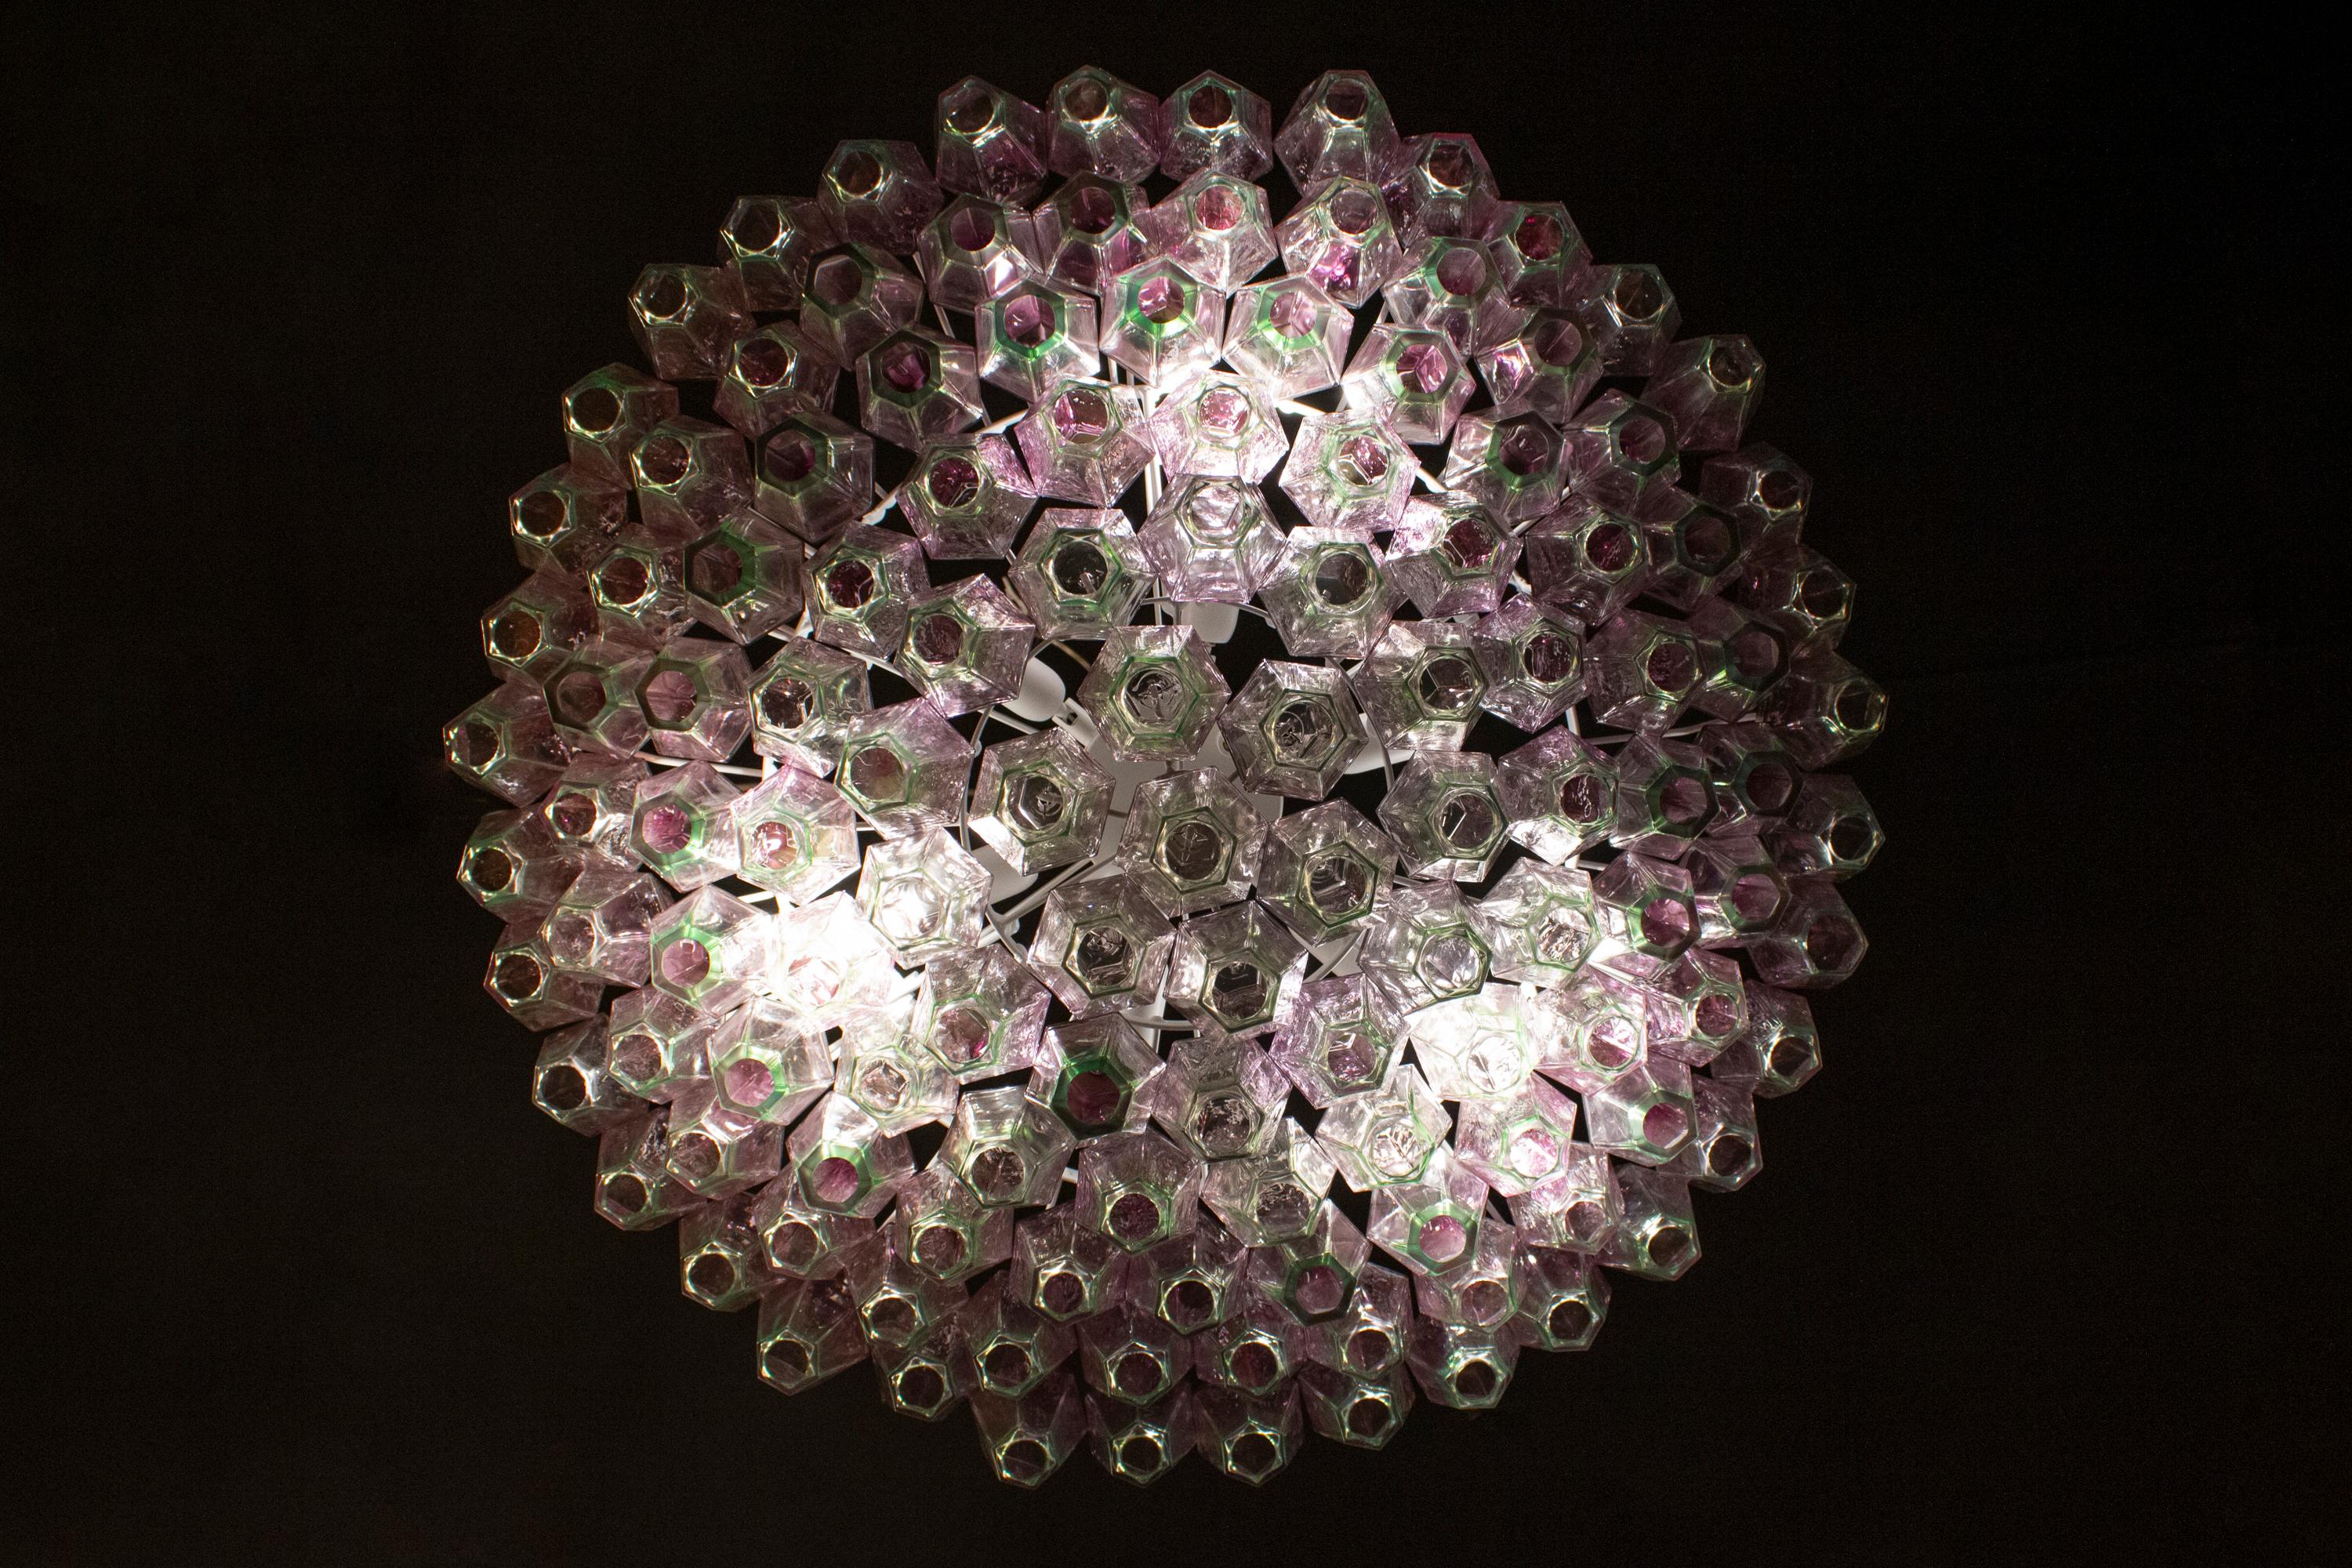 Striking Poliedri Pink and Green Murano Glass Chandelier, 1970 For Sale 4